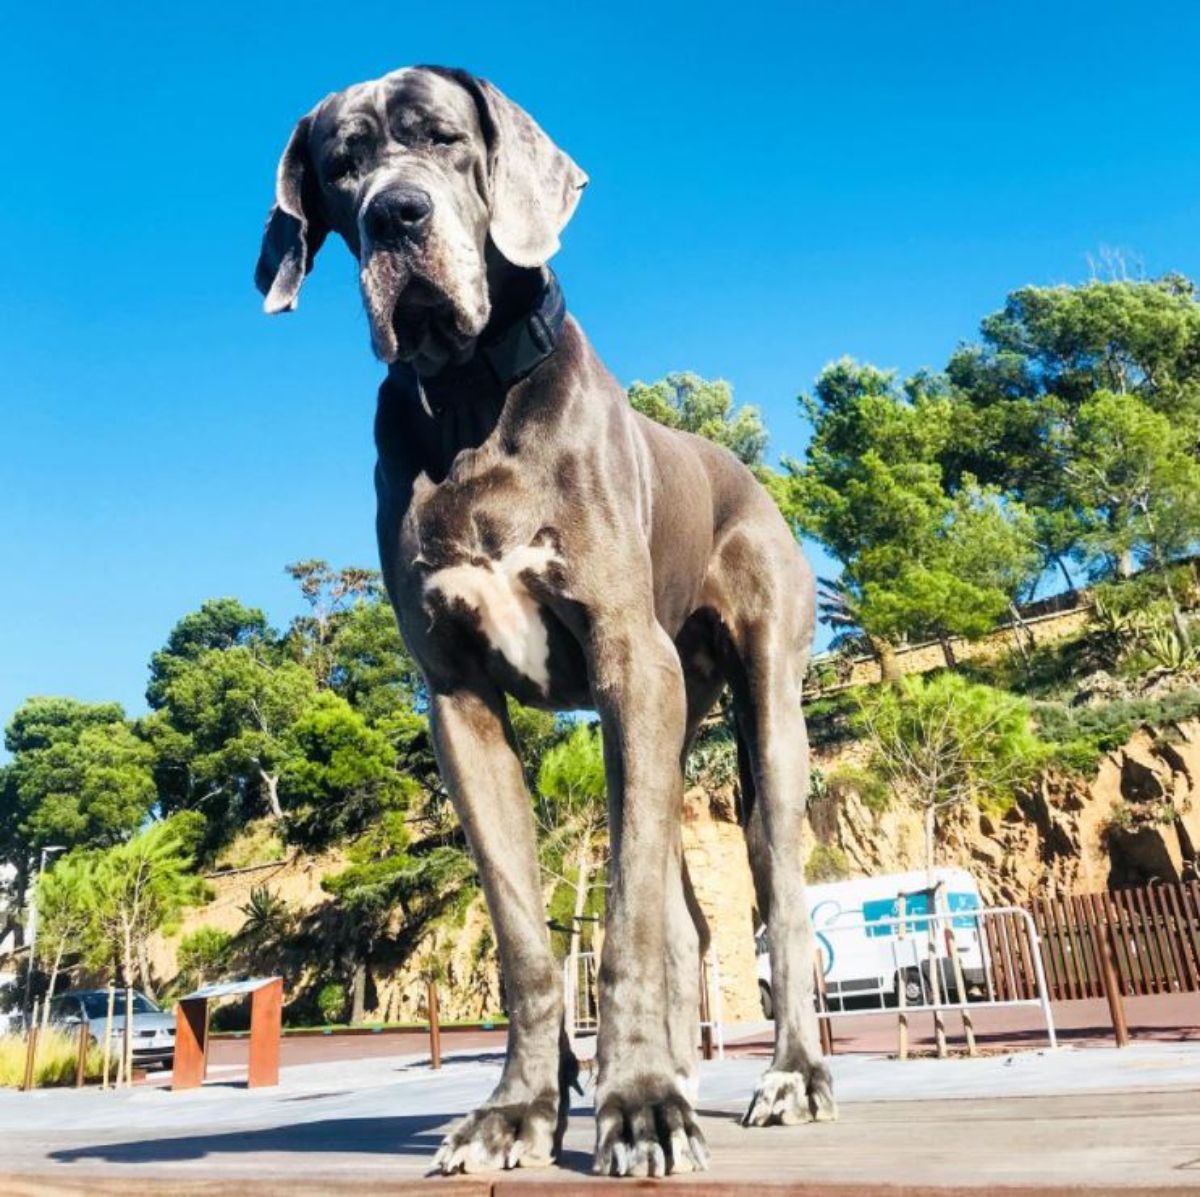 Blue great dane dog taking a walk at the park